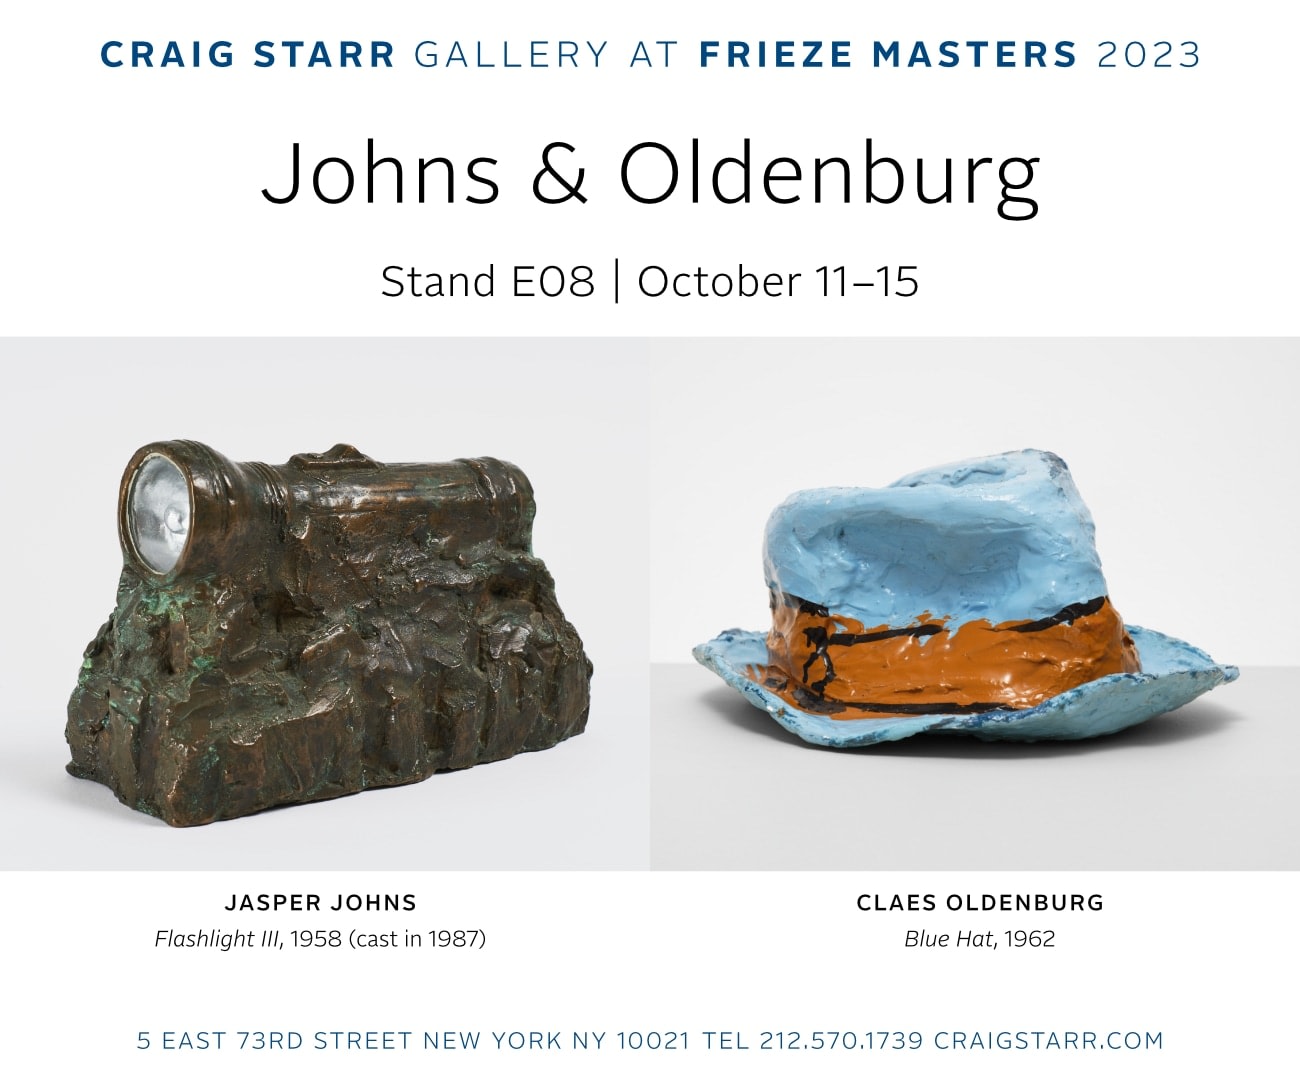 Johns & Oldenburg - Frieze Masters London - Viewing Room - Craig Starr Gallery Viewing Room